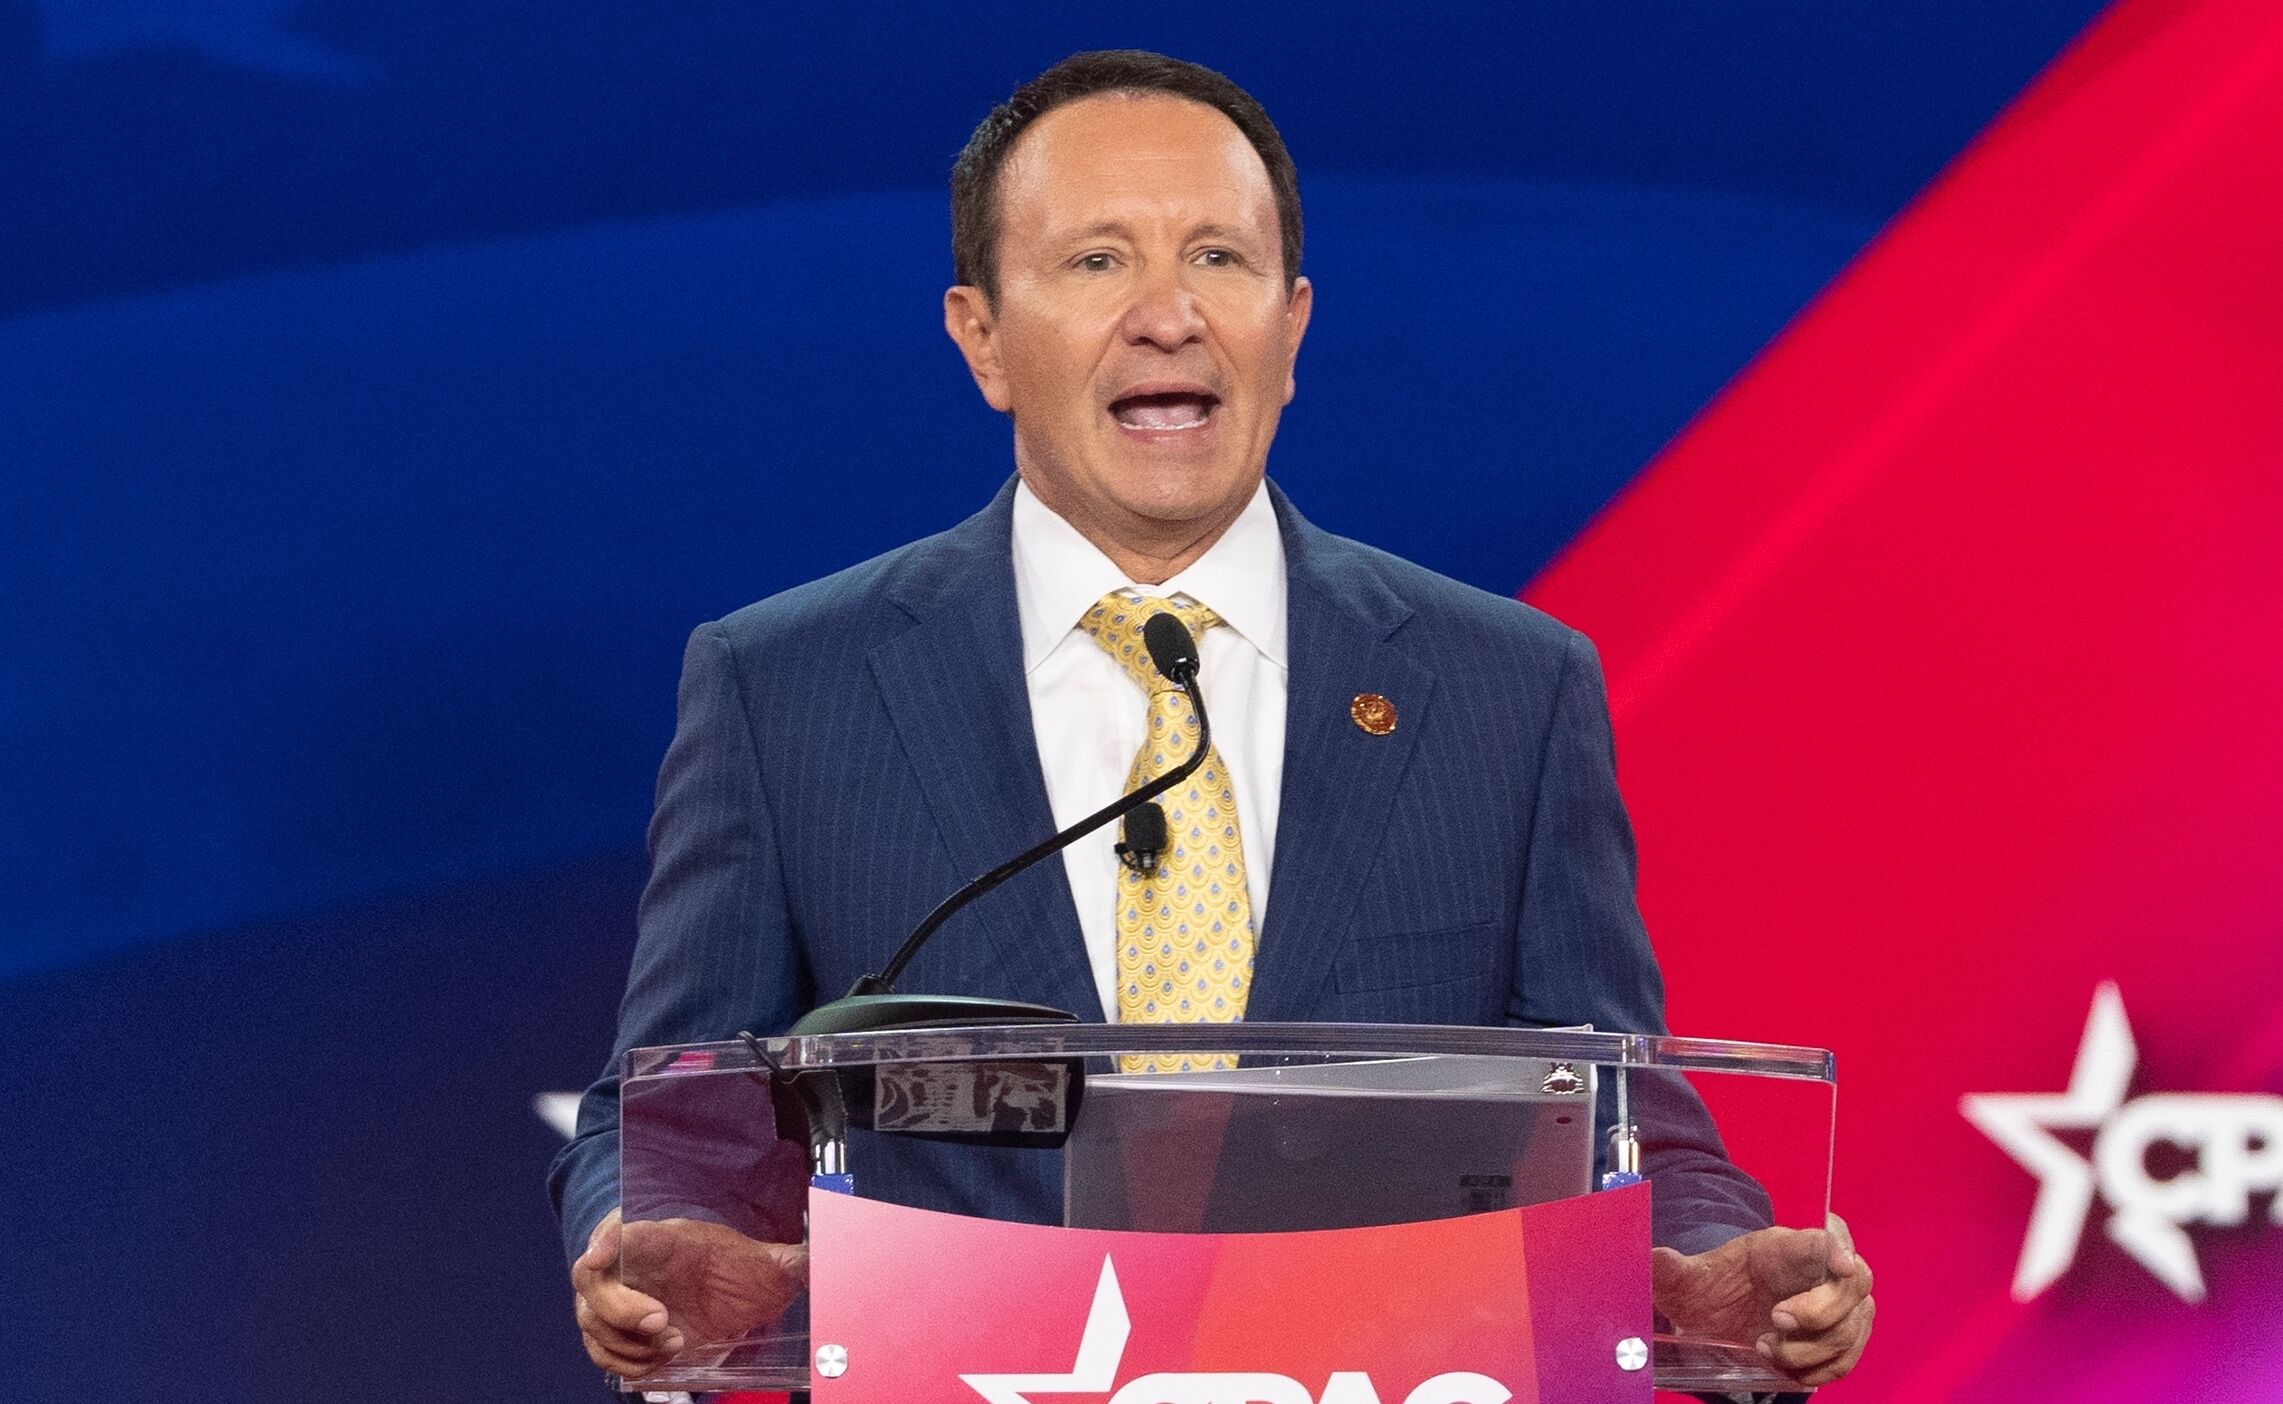 Dallas, TX - August 4, 2022: Louisiana Attorney General Jeff Landry speaks during CPAC Texas 2022 conference at Hilton Anatole, jeff-landry-louisiana-library-book-sexualize-children-online-reporting-form